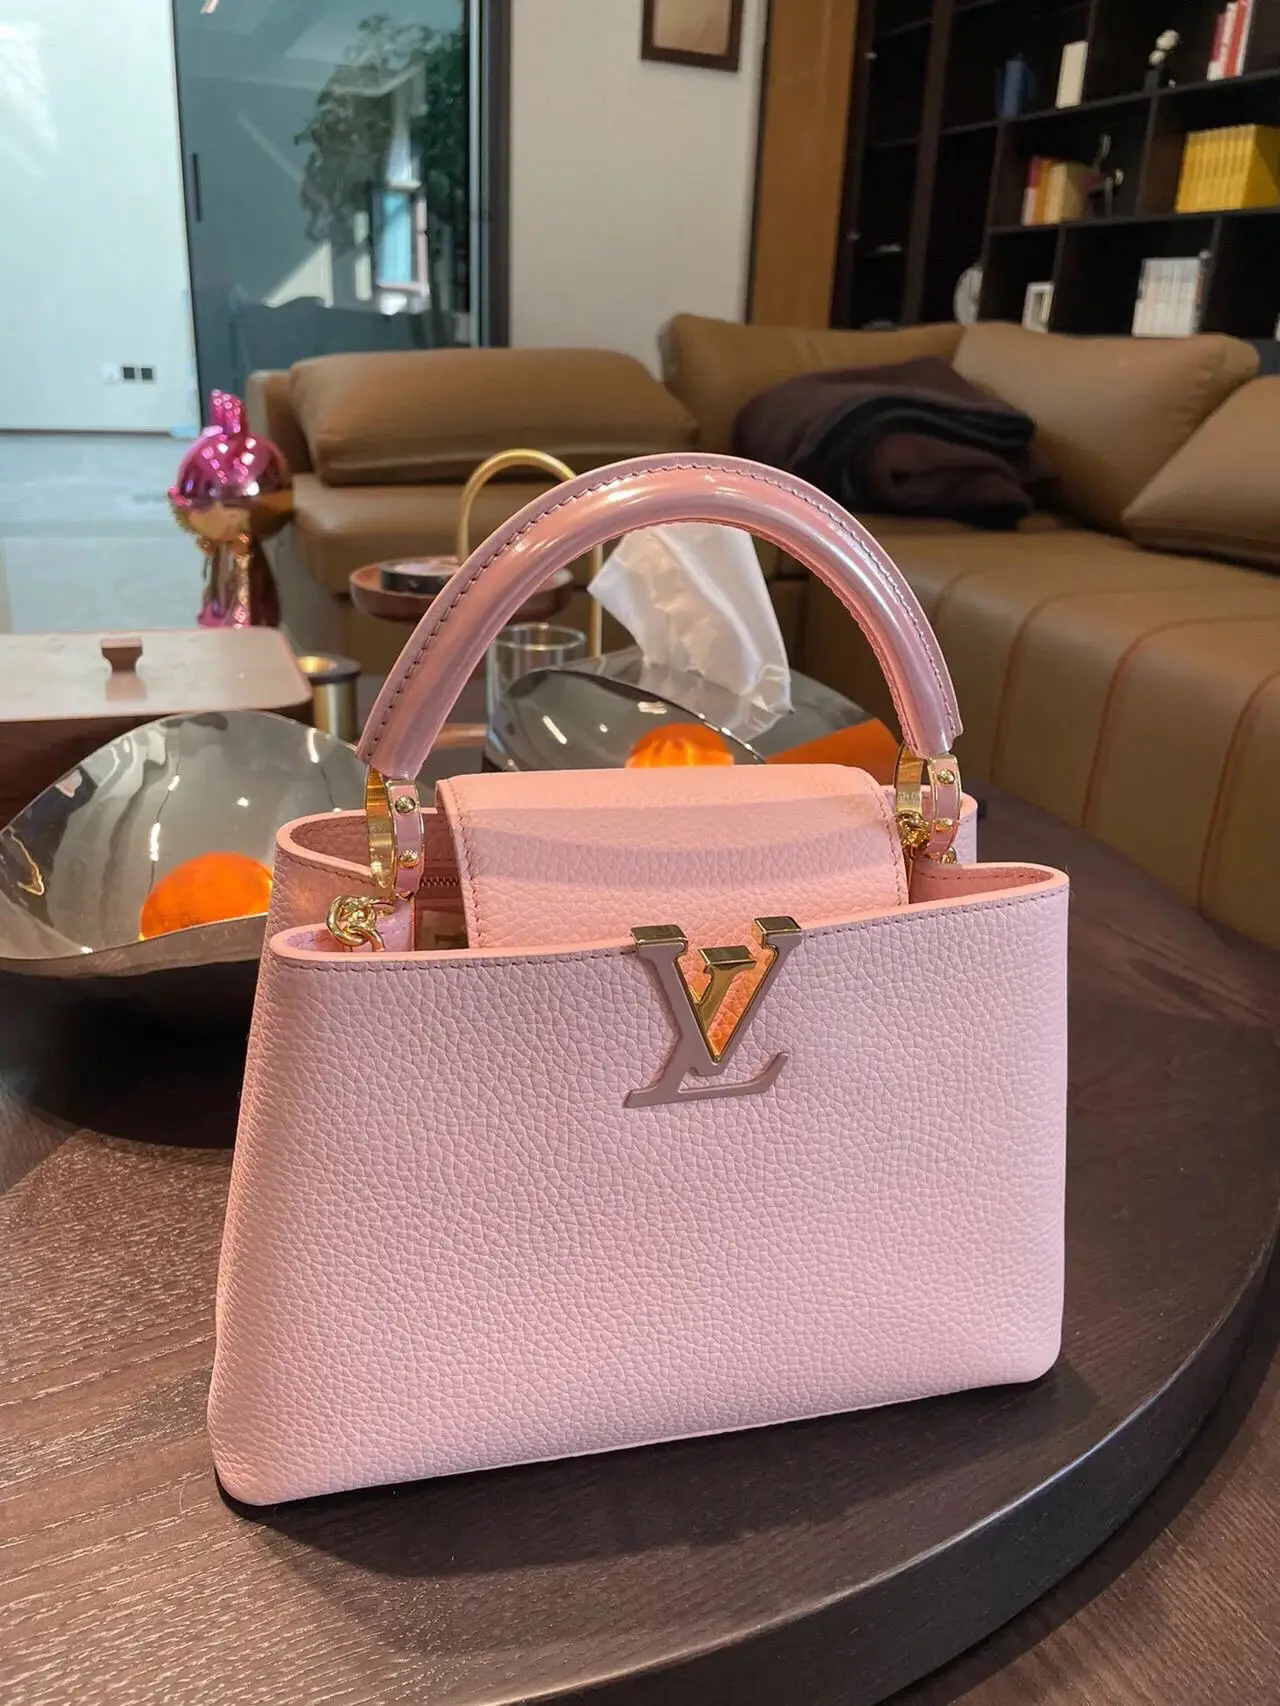 LOUIS VUITTON CAPUCINES  First impressions of the Capucines & what fits  inside the PM? 